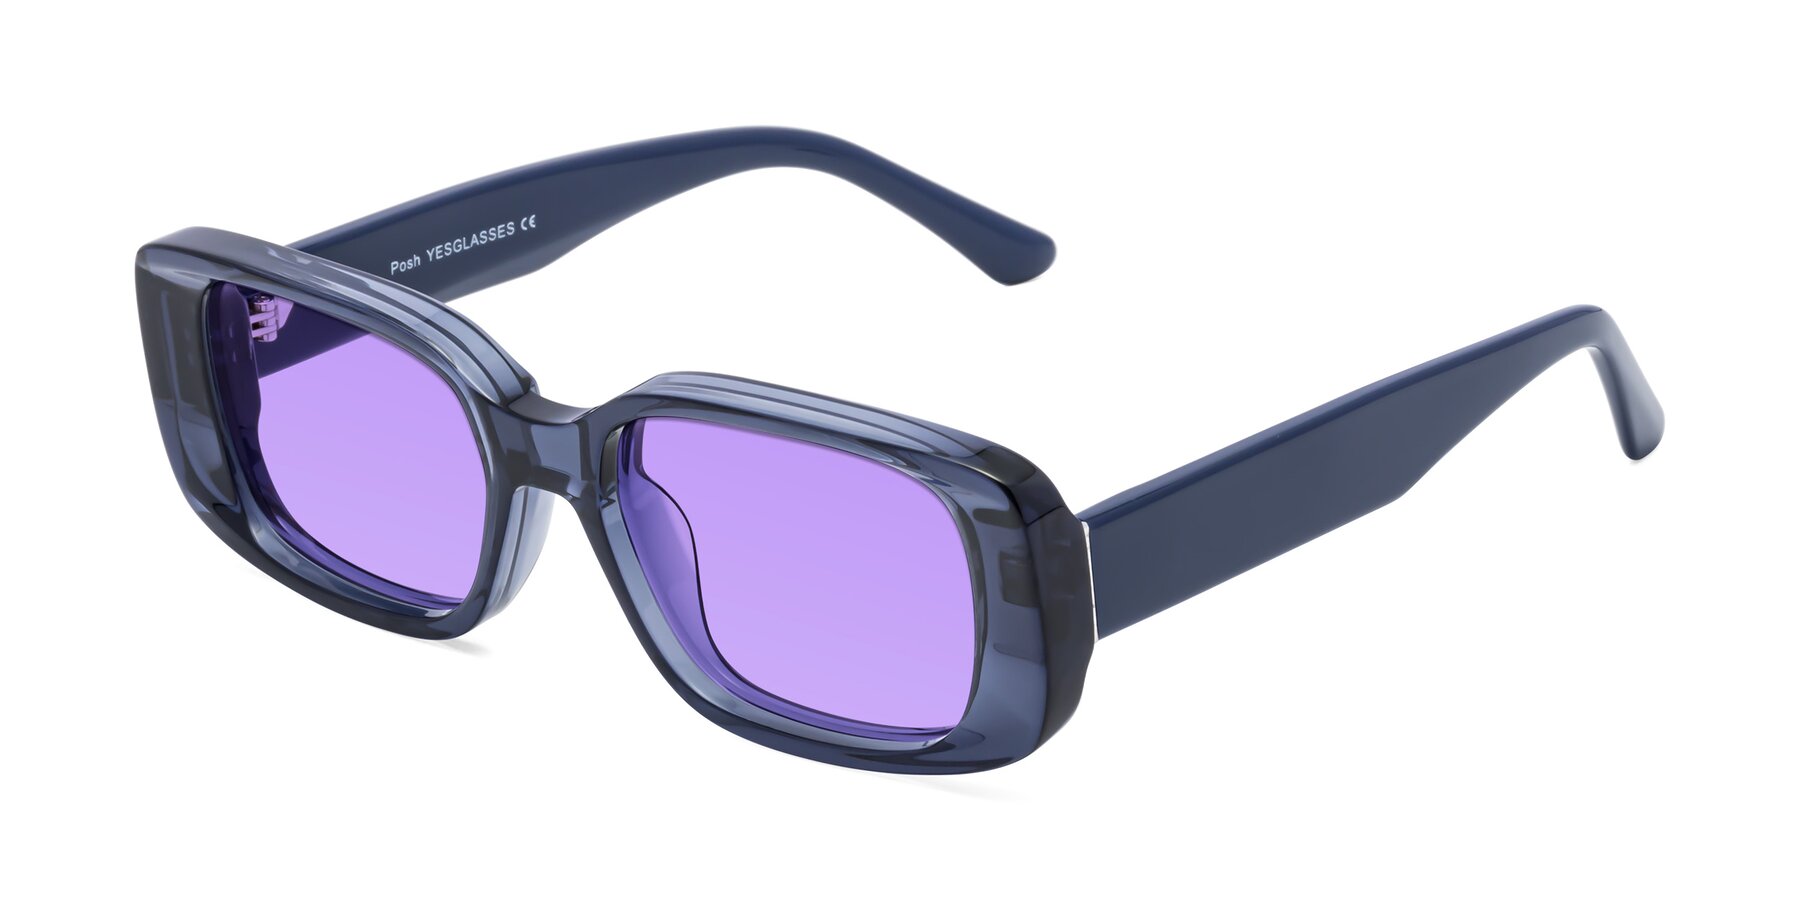 Angle of Posh in Translucent Blue with Medium Purple Tinted Lenses